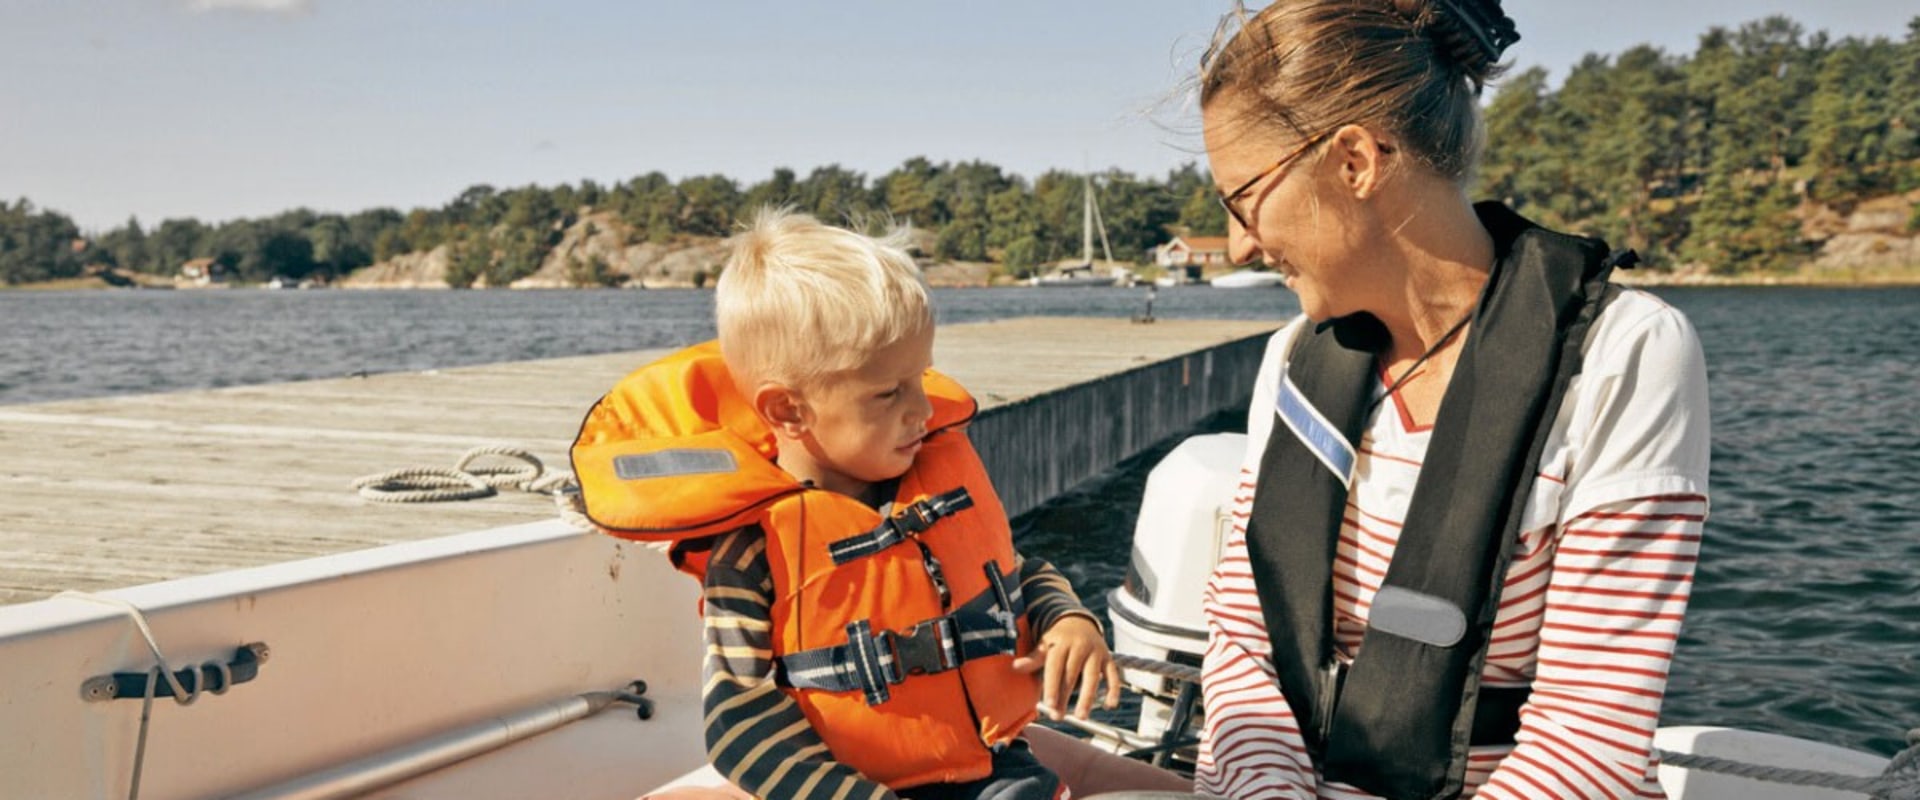 A Comprehensive Guide to Checking Weather Conditions for Safe Boating Practices